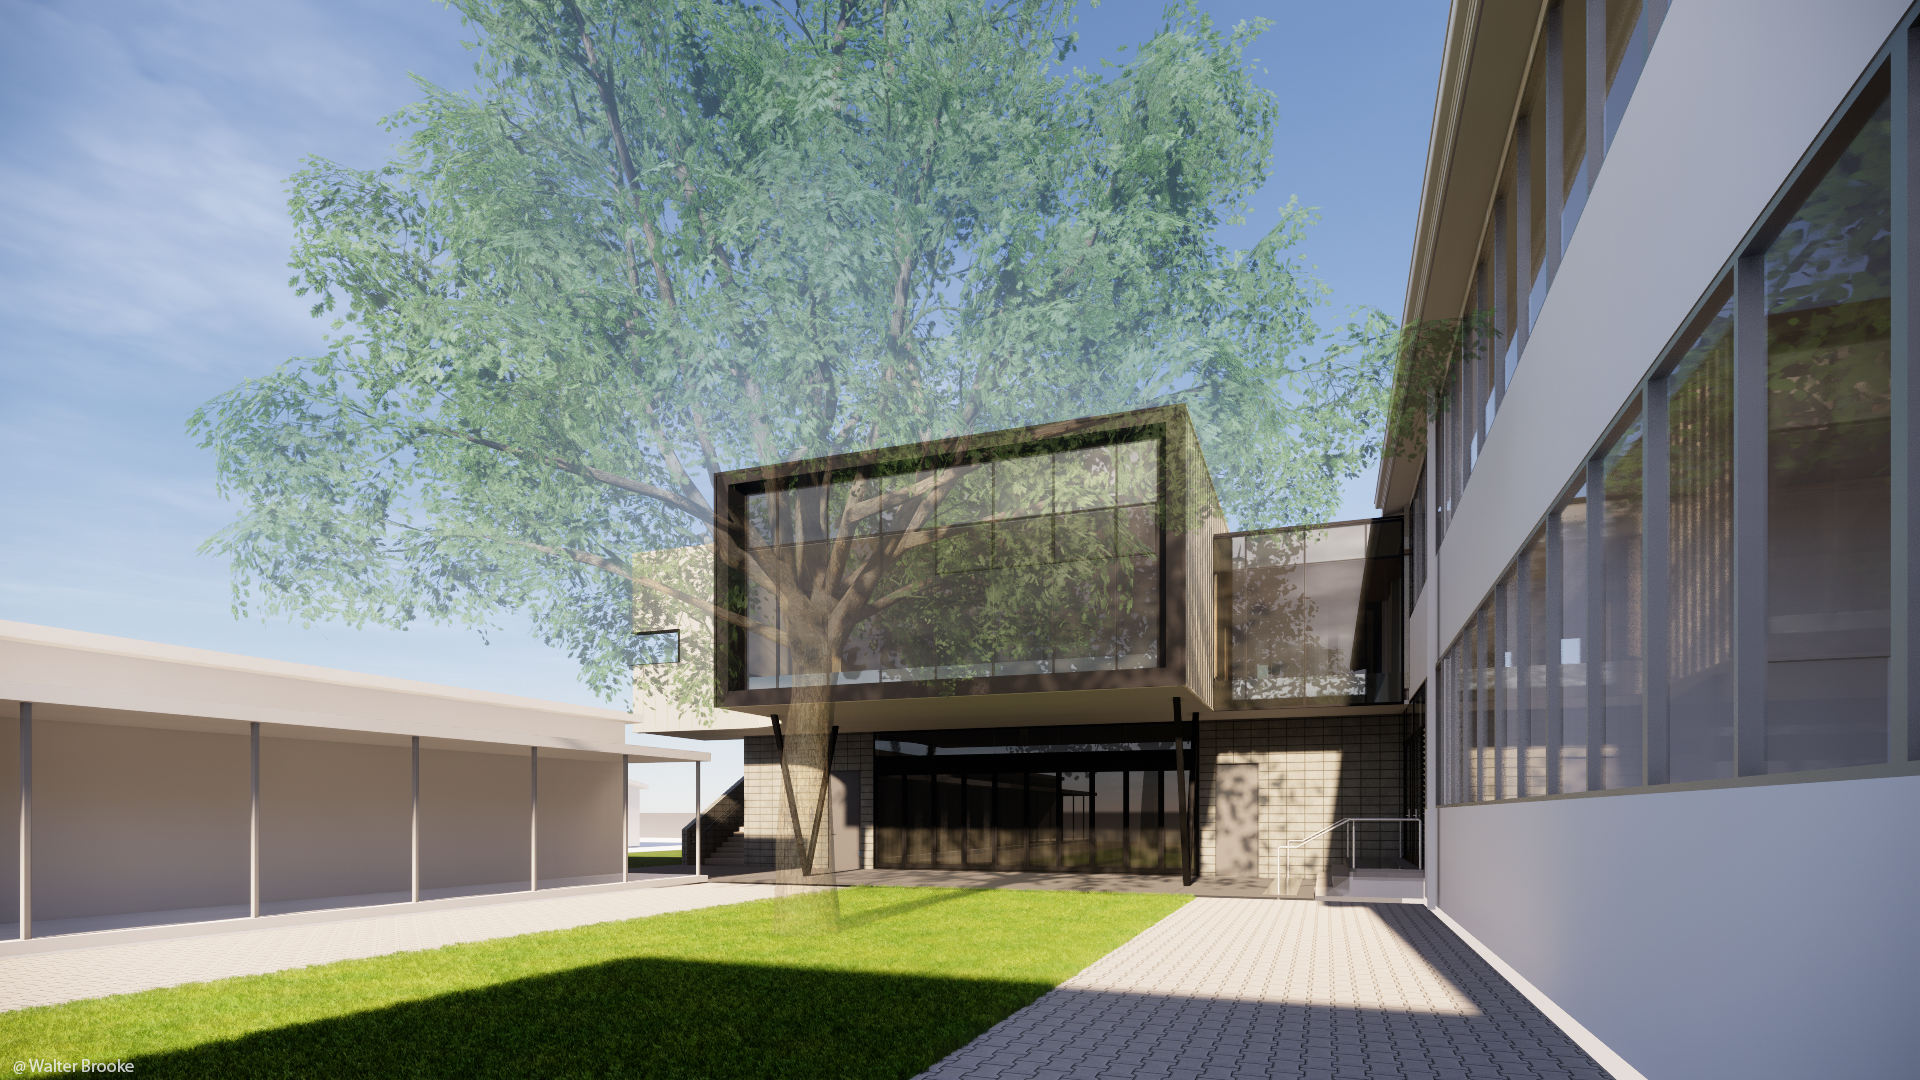 An artist impression of the Plympton International College capital works upgrade by Walter Brooke & Associate Architects